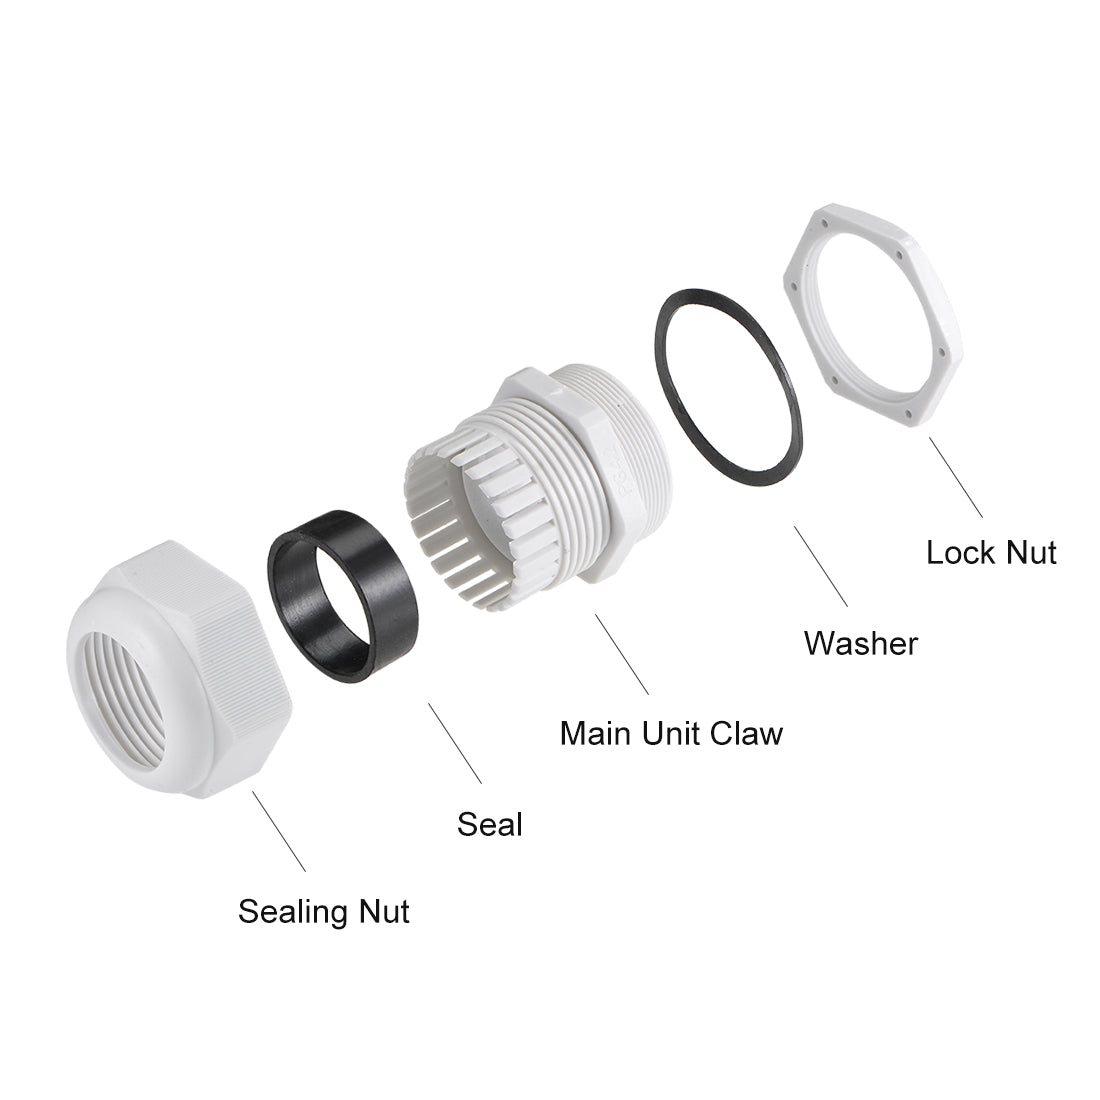 uxcell Uxcell PG42 Cable Gland 32mm-38mm Wire Hole Waterproof Nylon Joint Adjustable Locknut with Washer White 3pcs